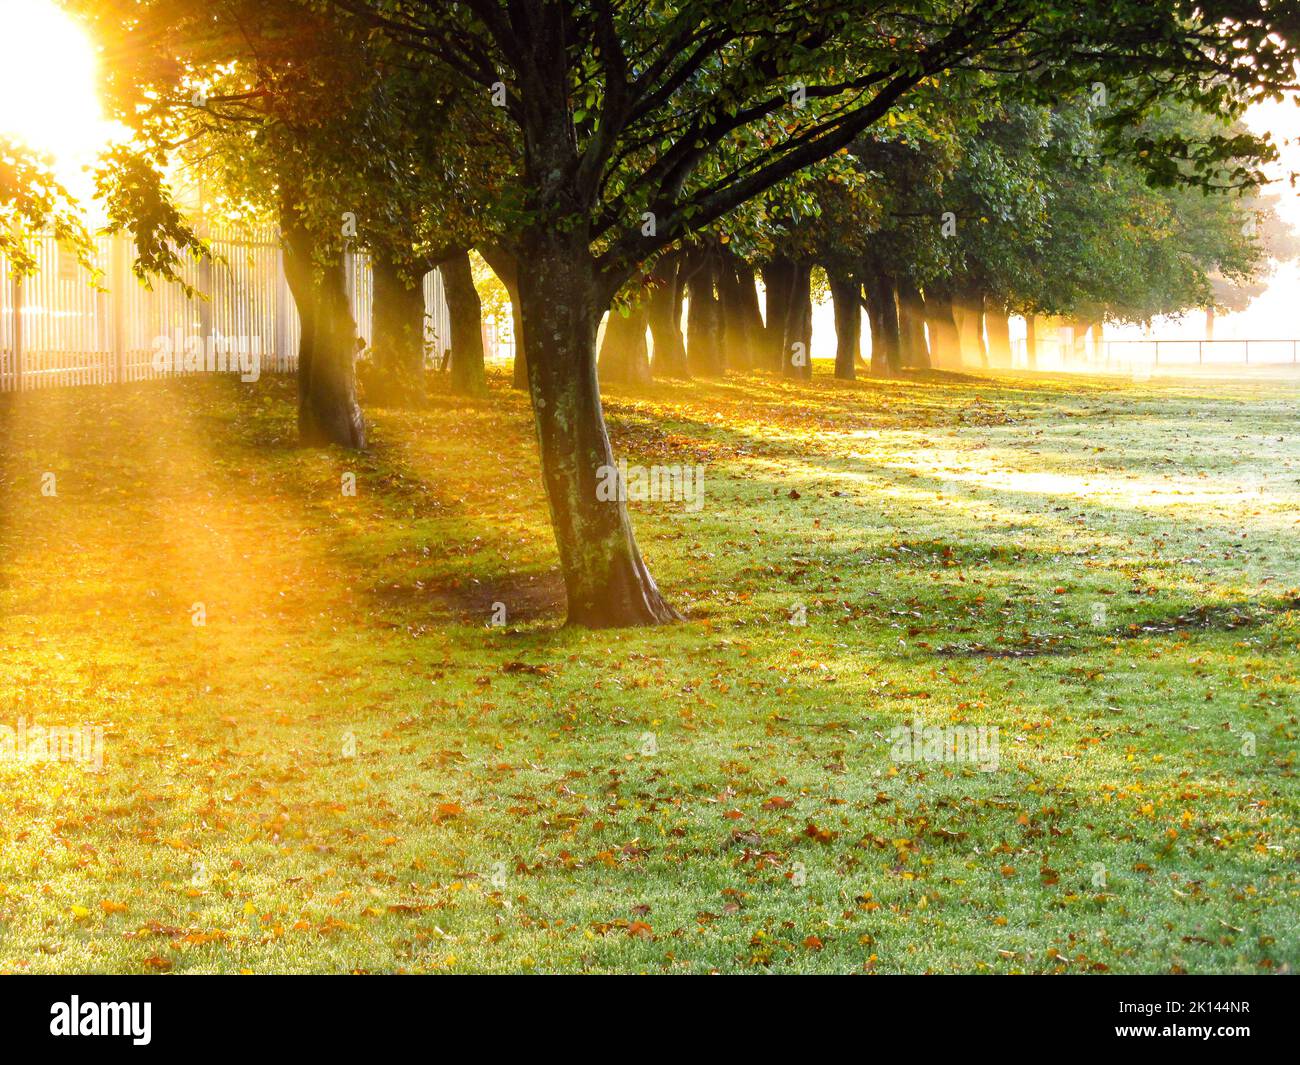 Magical view of the golden first light of dawn shining through a line of trees. Stock Photo